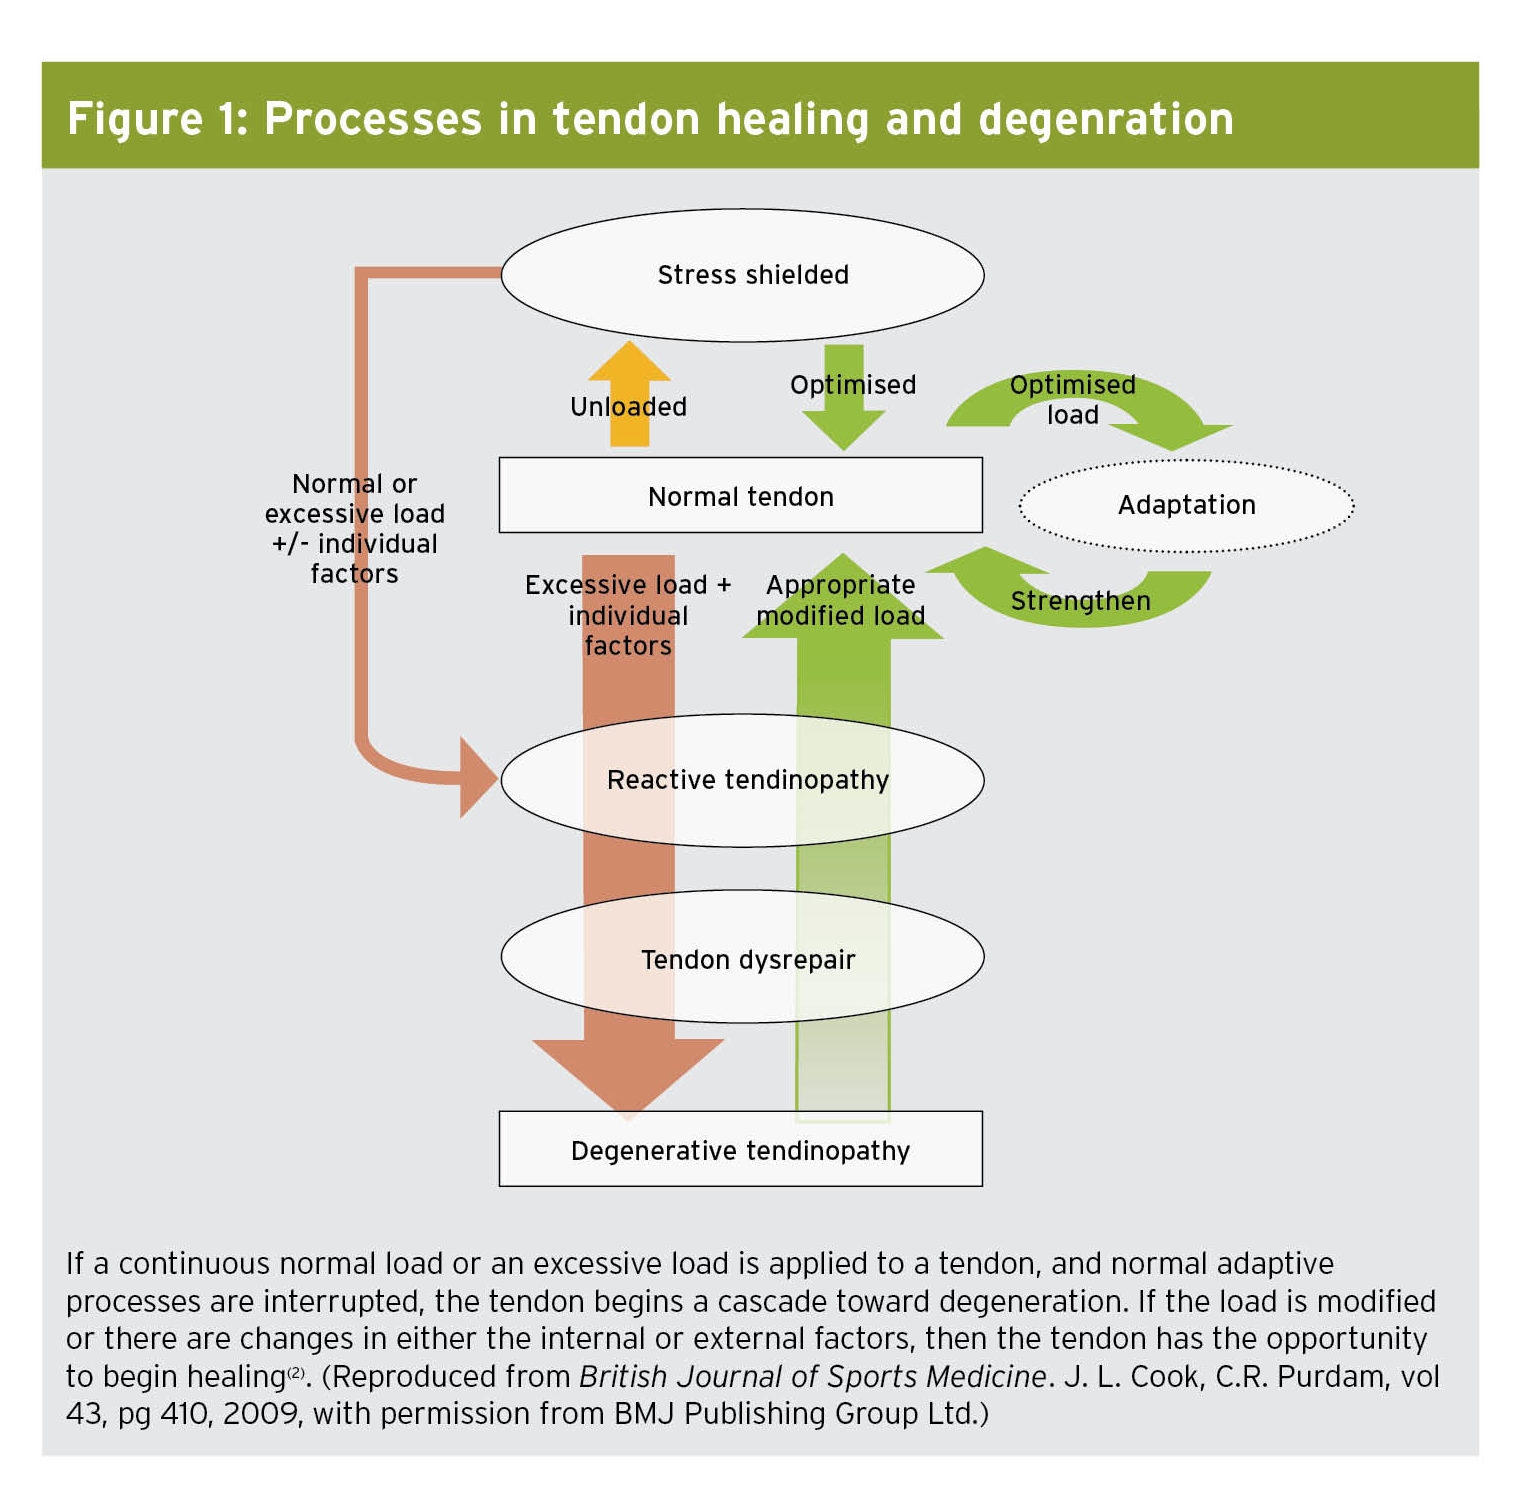 If a continuous normal load or an excessive load is applied to a tendon, and normal adaptive processes are interrupted, the tendon begins a cascade toward degeneration. If the load is modified or there are changes in either the internal or external factors, then the tendon has the opportunity to begin healing(2). (Reproduced from British Journal of Sports Medicine. J. L. Cook, C.R. Purdam, vol 43, pg 410, 2009, with permission from BMJ Publishing Group Ltd.)